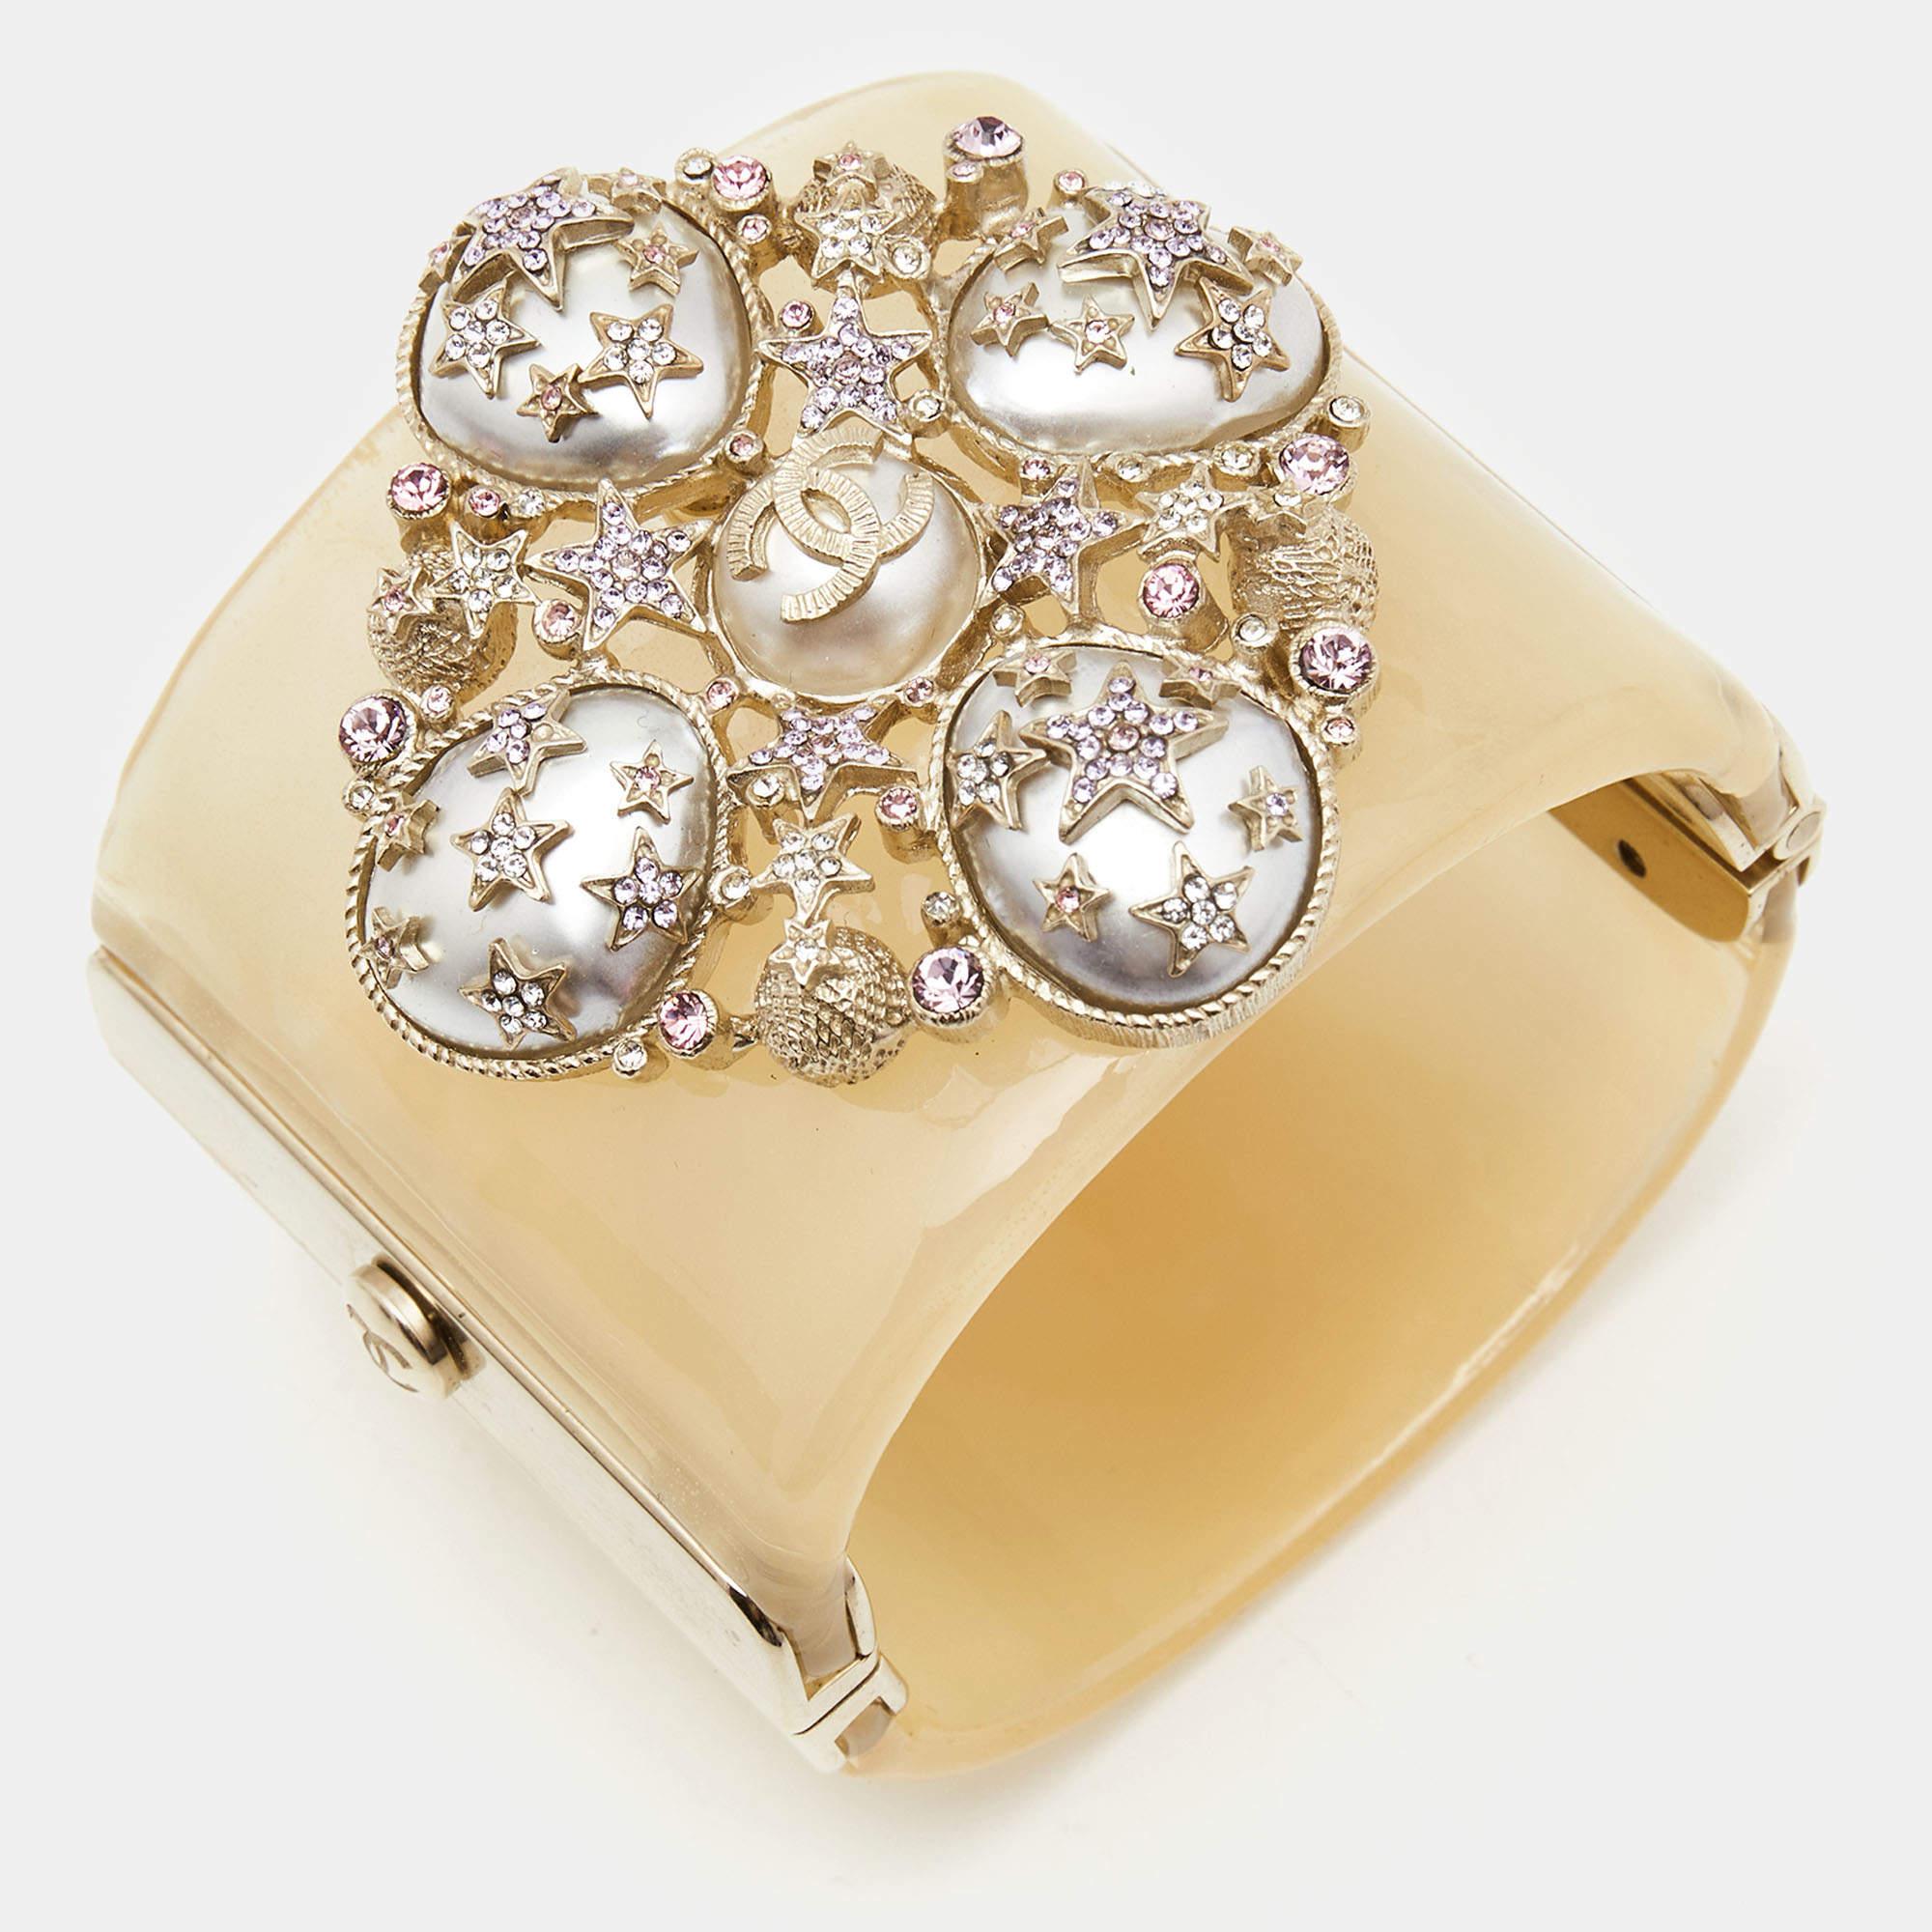 The Chanel CC bracelet is an exquisite accessory. This cuff features the iconic CC logo adorned with faux pearls and crystals, set in a glossy resin base. Its gold-tone finish exudes luxury, making it a statement piece for any elegant ensemble.

